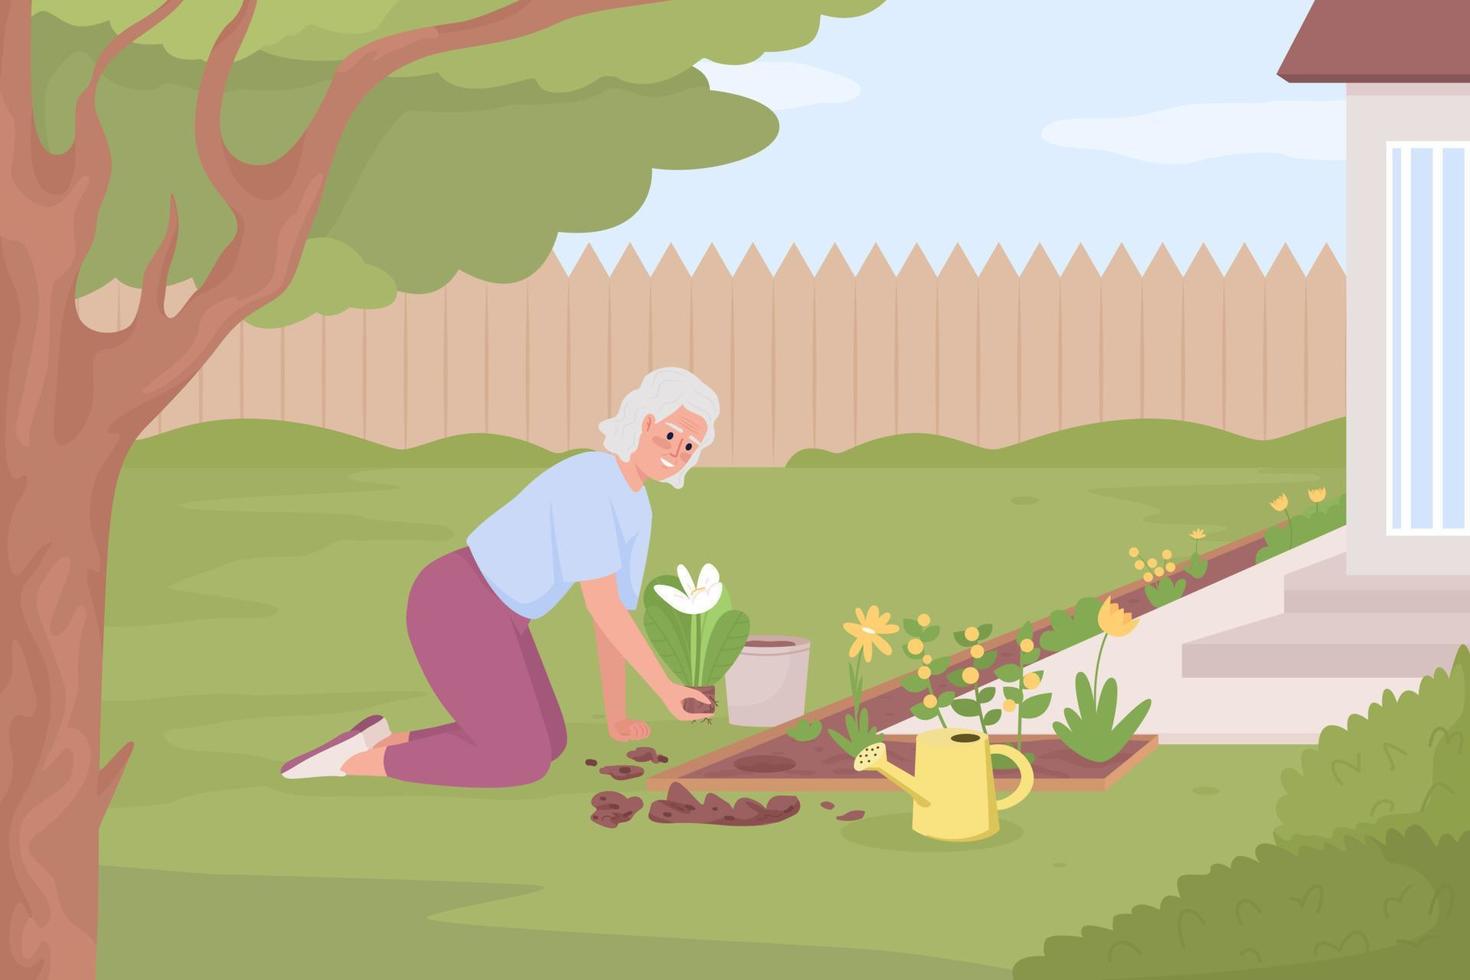 Gardening hobby for senior flat color vector illustration. Elderly woman planting flower beds in garden. Fully editable 2D simple cartoon character with green landscape and home fence on background